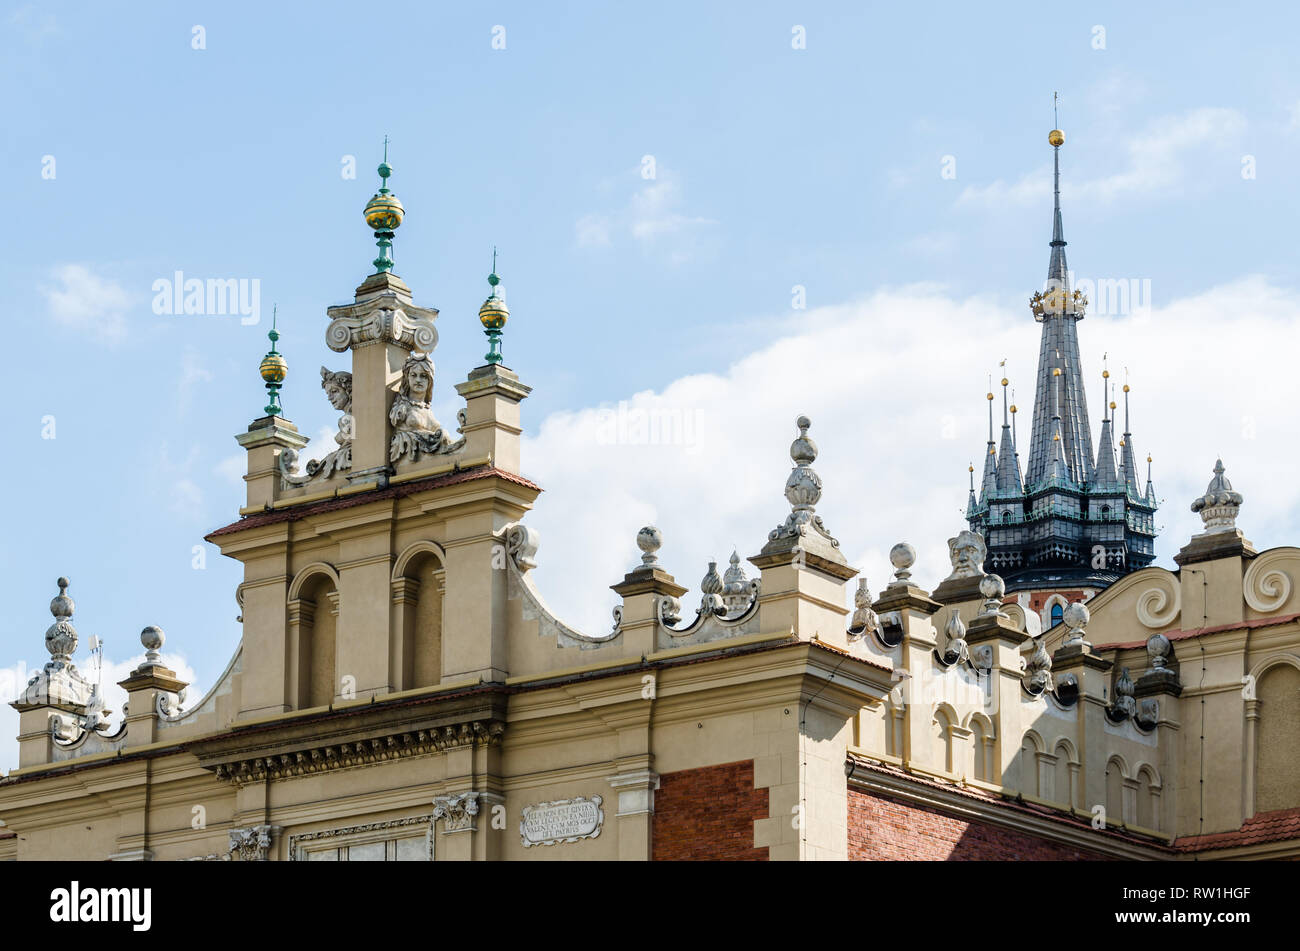 Architectural details of cloth hall and St. Mary's Basilica tower, Main Square, Old Town, Krakow, Poland Stock Photo